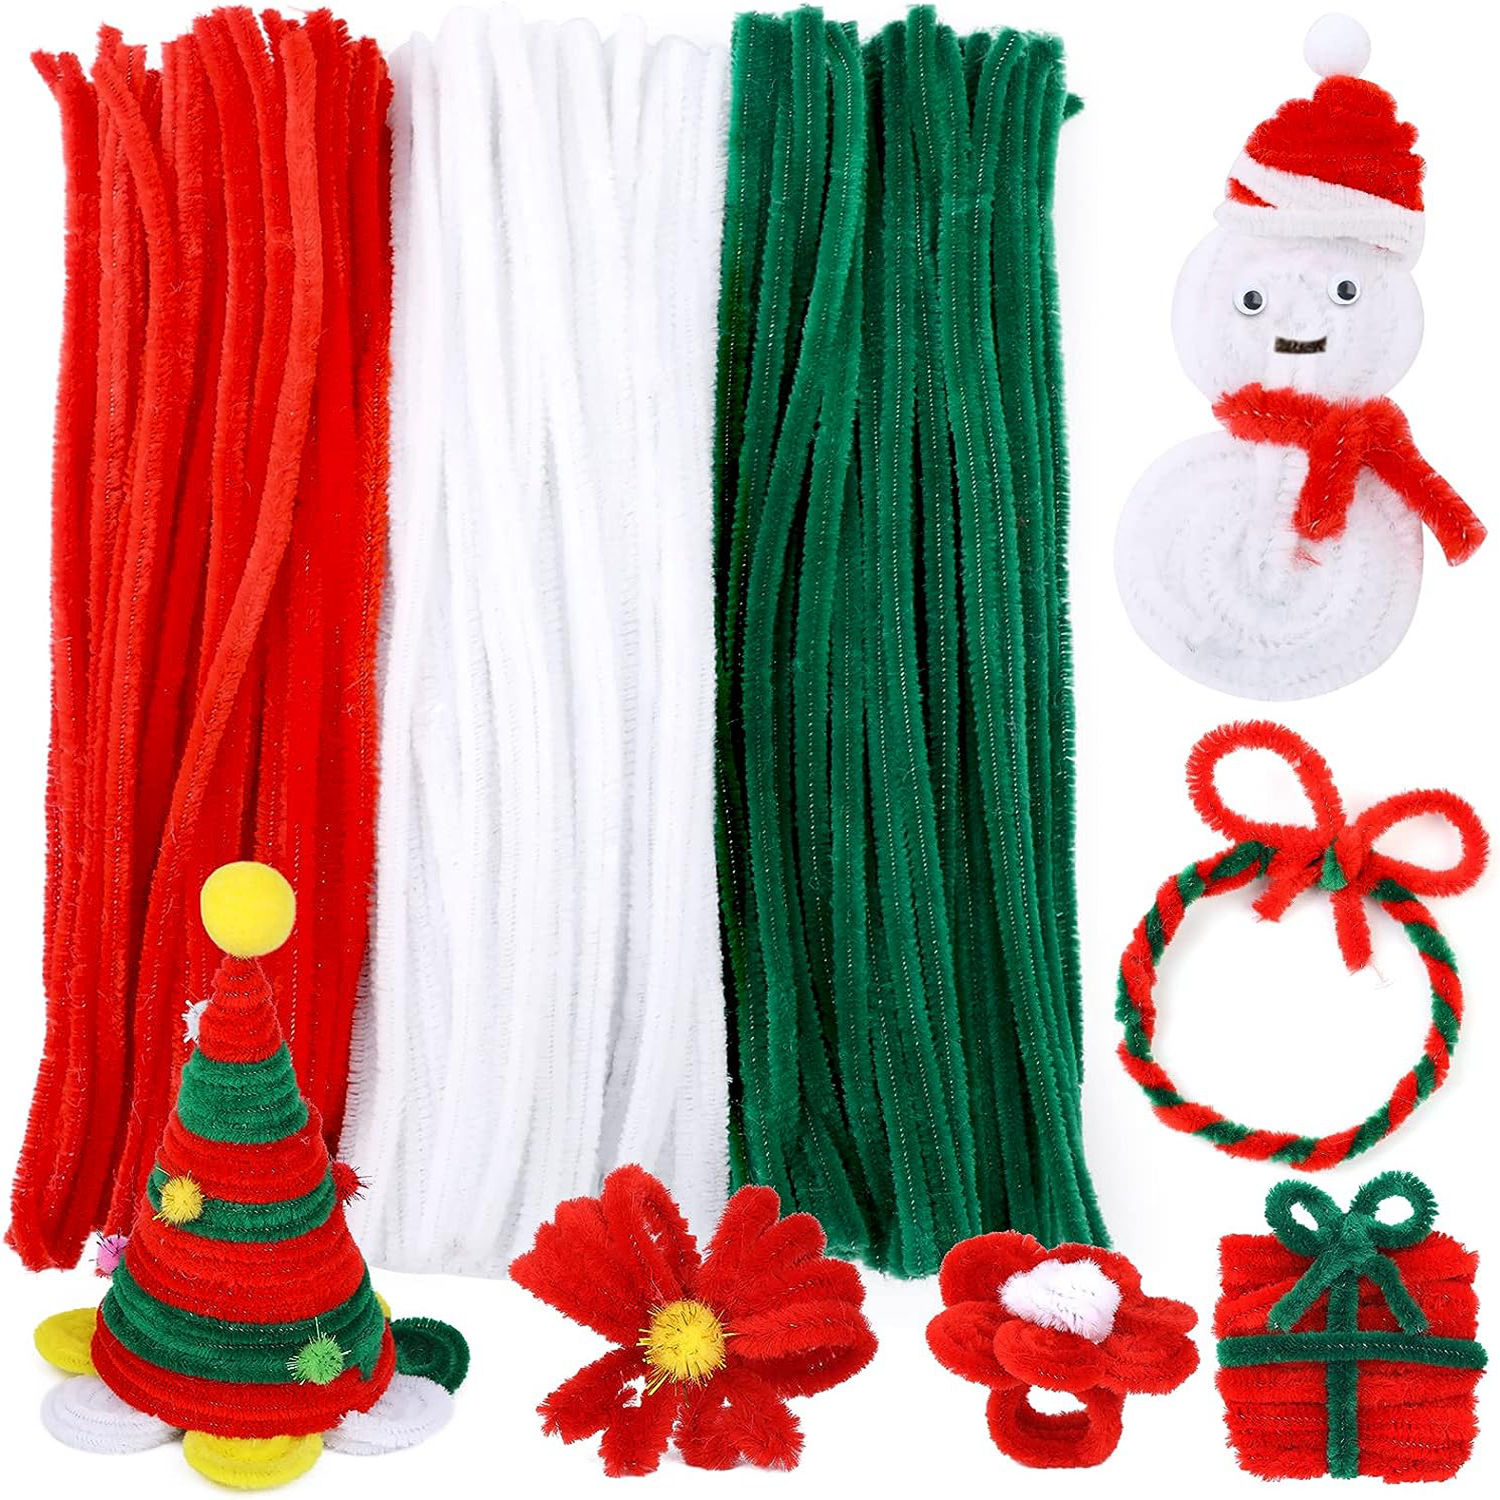  150Pcs Christmas Pipe Cleaners Craft Set Including 50Pcs Green  Chenille Stems, 50Pcs White Chenille Stems, and 50Pcs Red Pipe Cleaners for  DIY Crafts Christmas Decorations (150Pcs Red White Green) : Arts